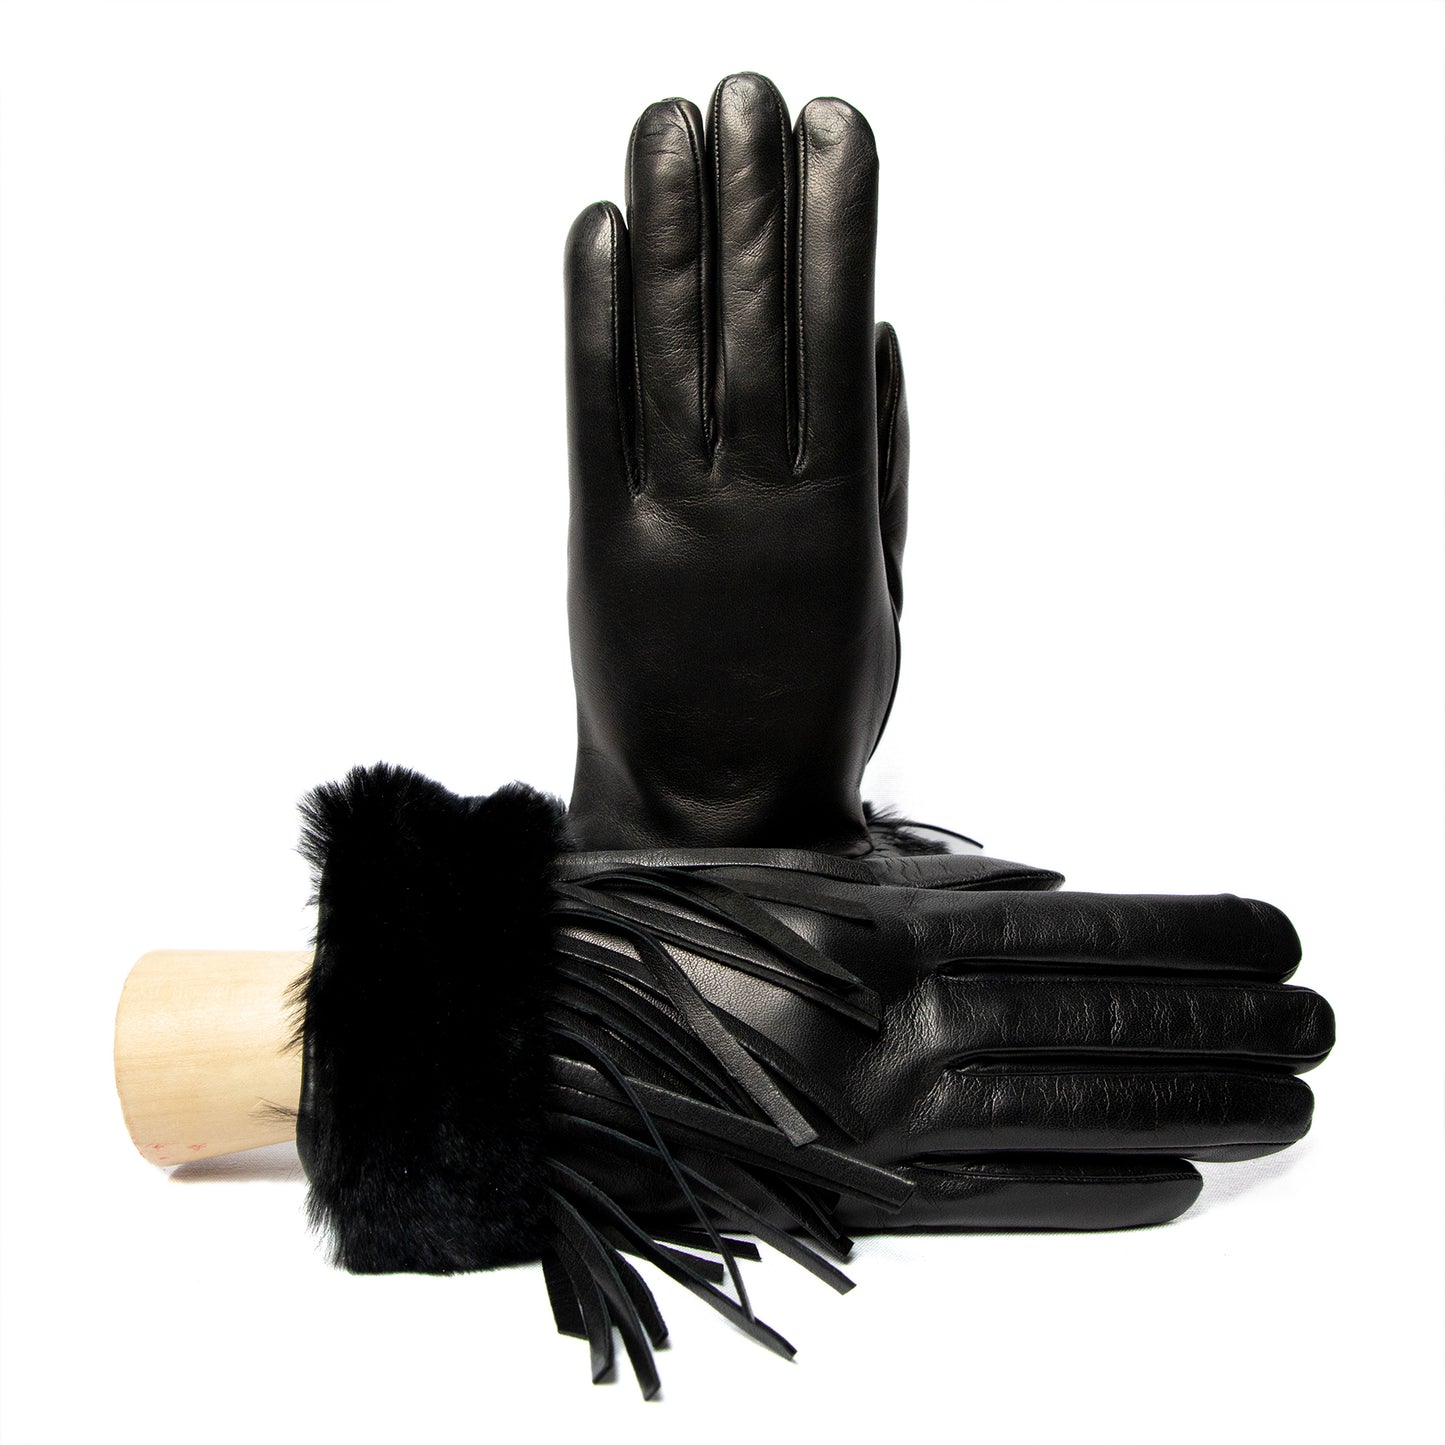 Women's black nappa leather gloves with fringe details and natural fur